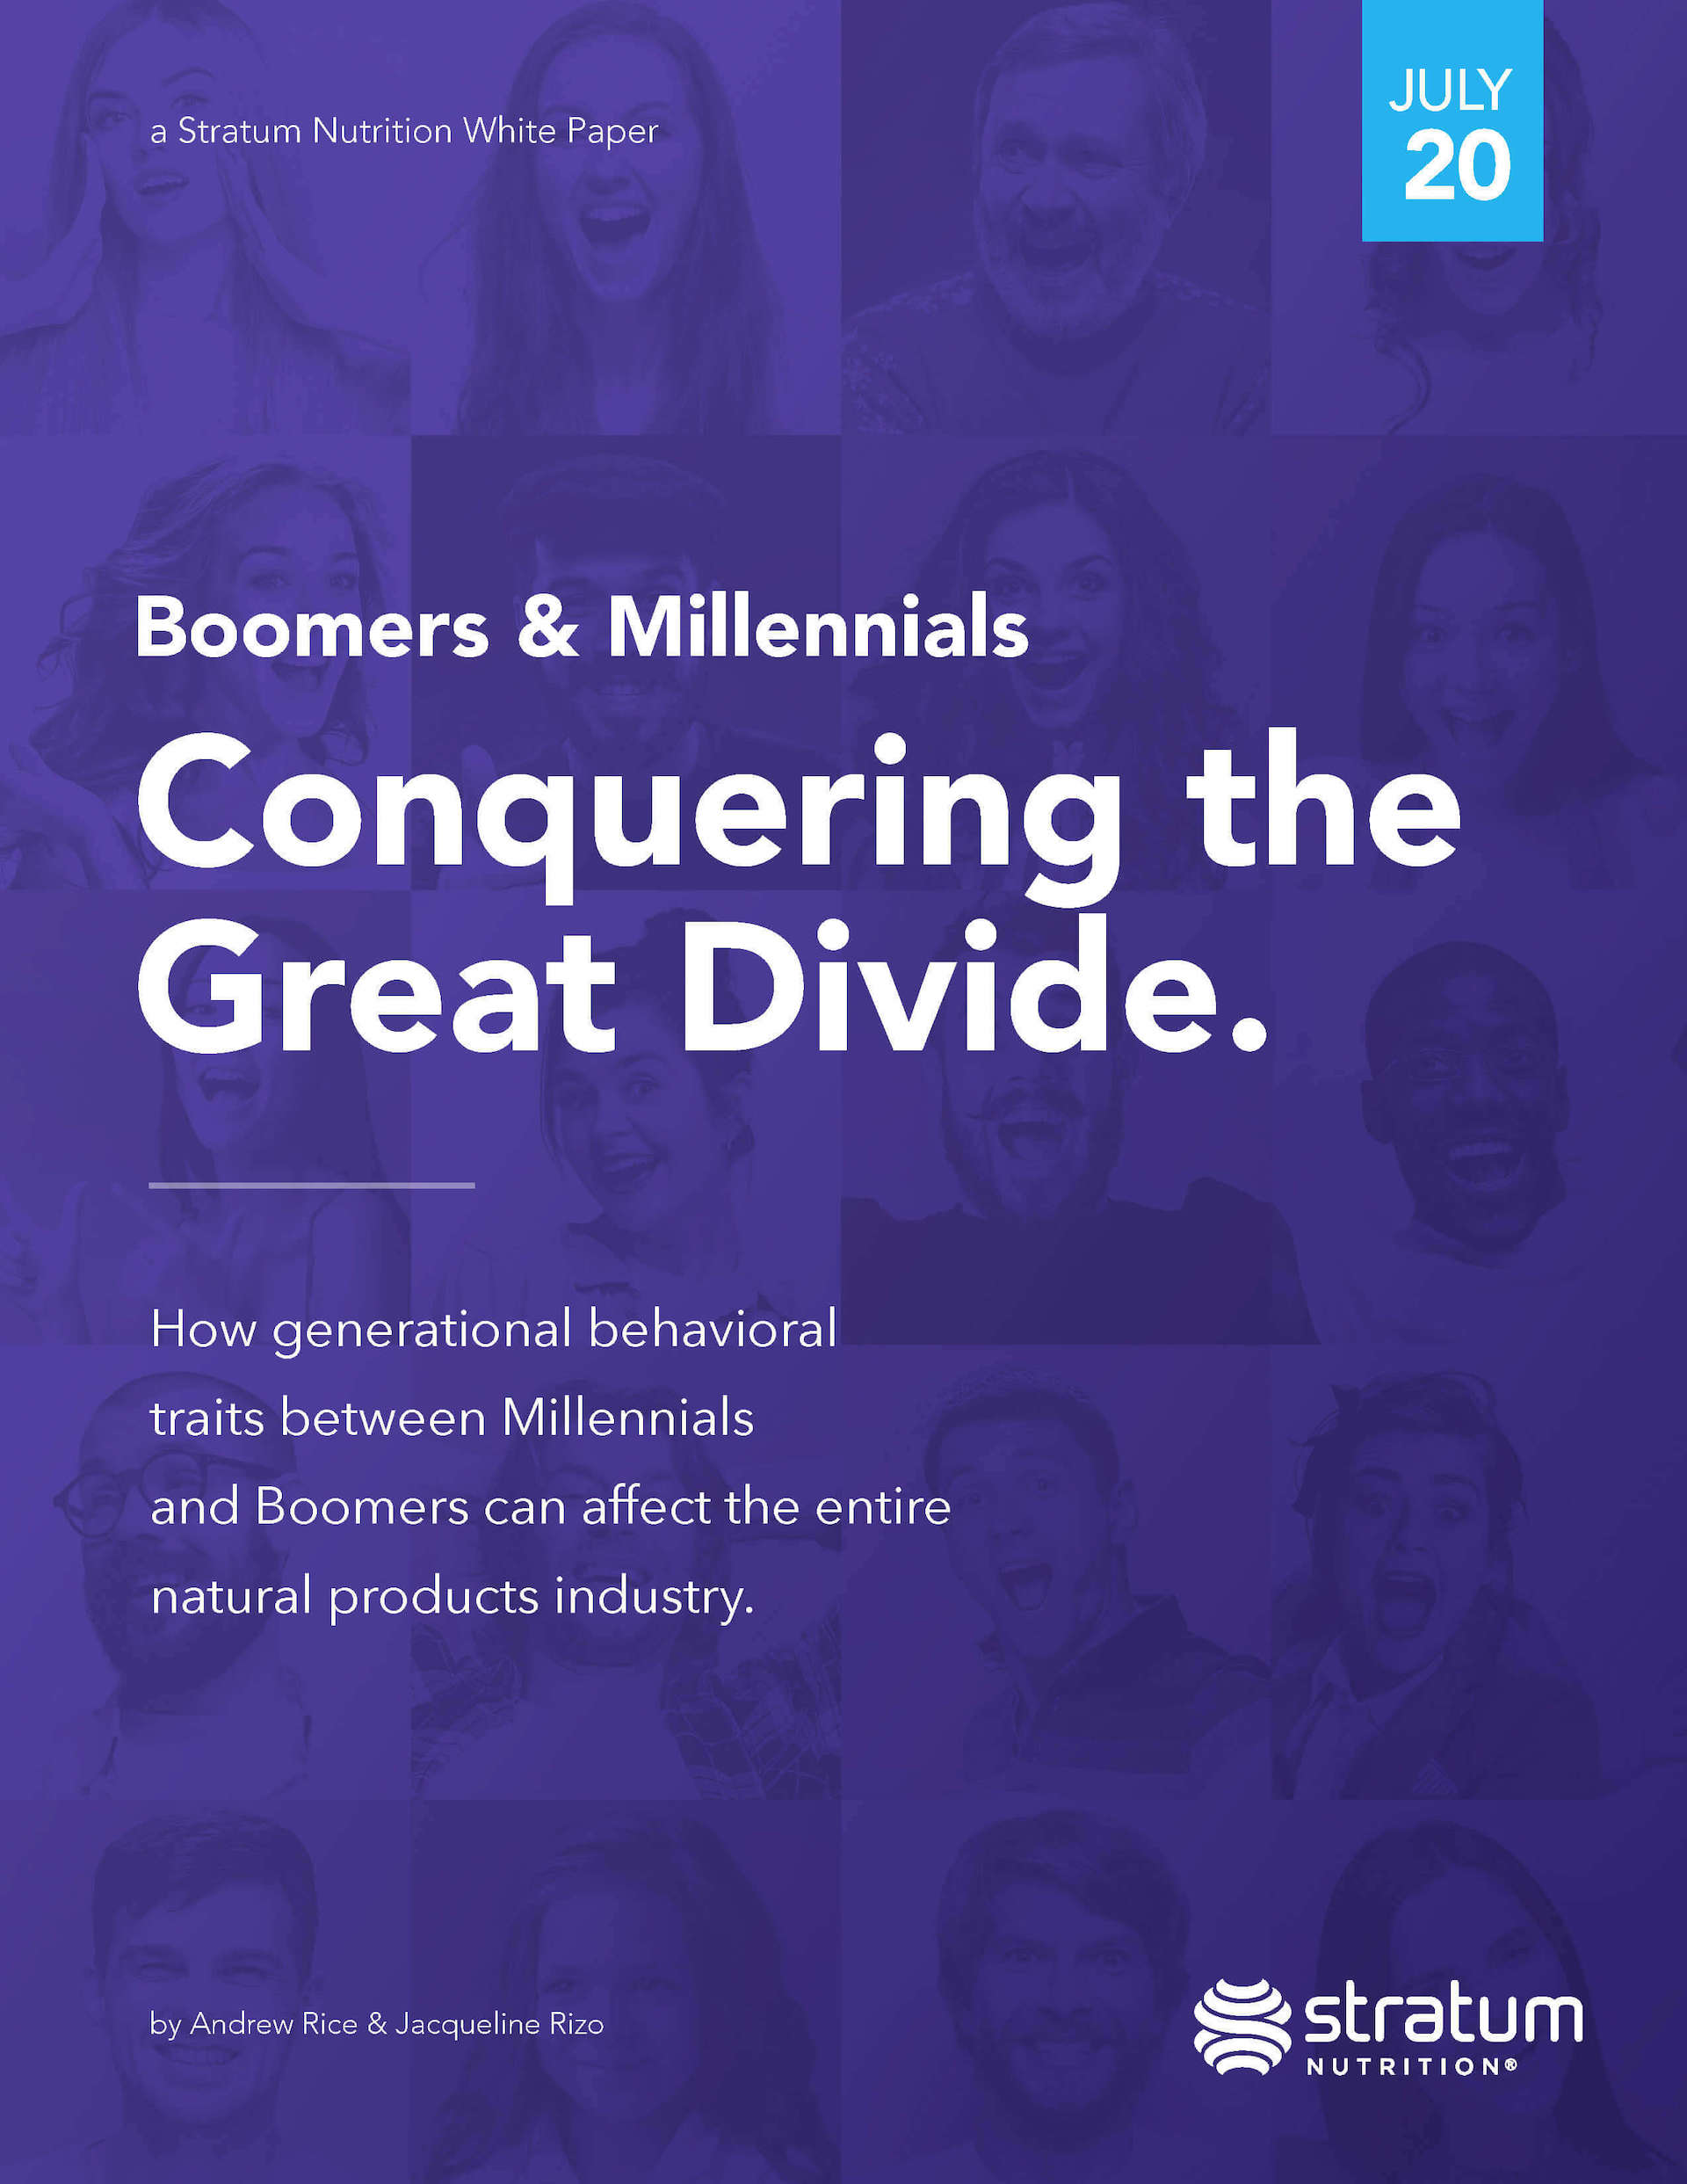 Boomers & Millennials: Conquering the Great Divide blog image